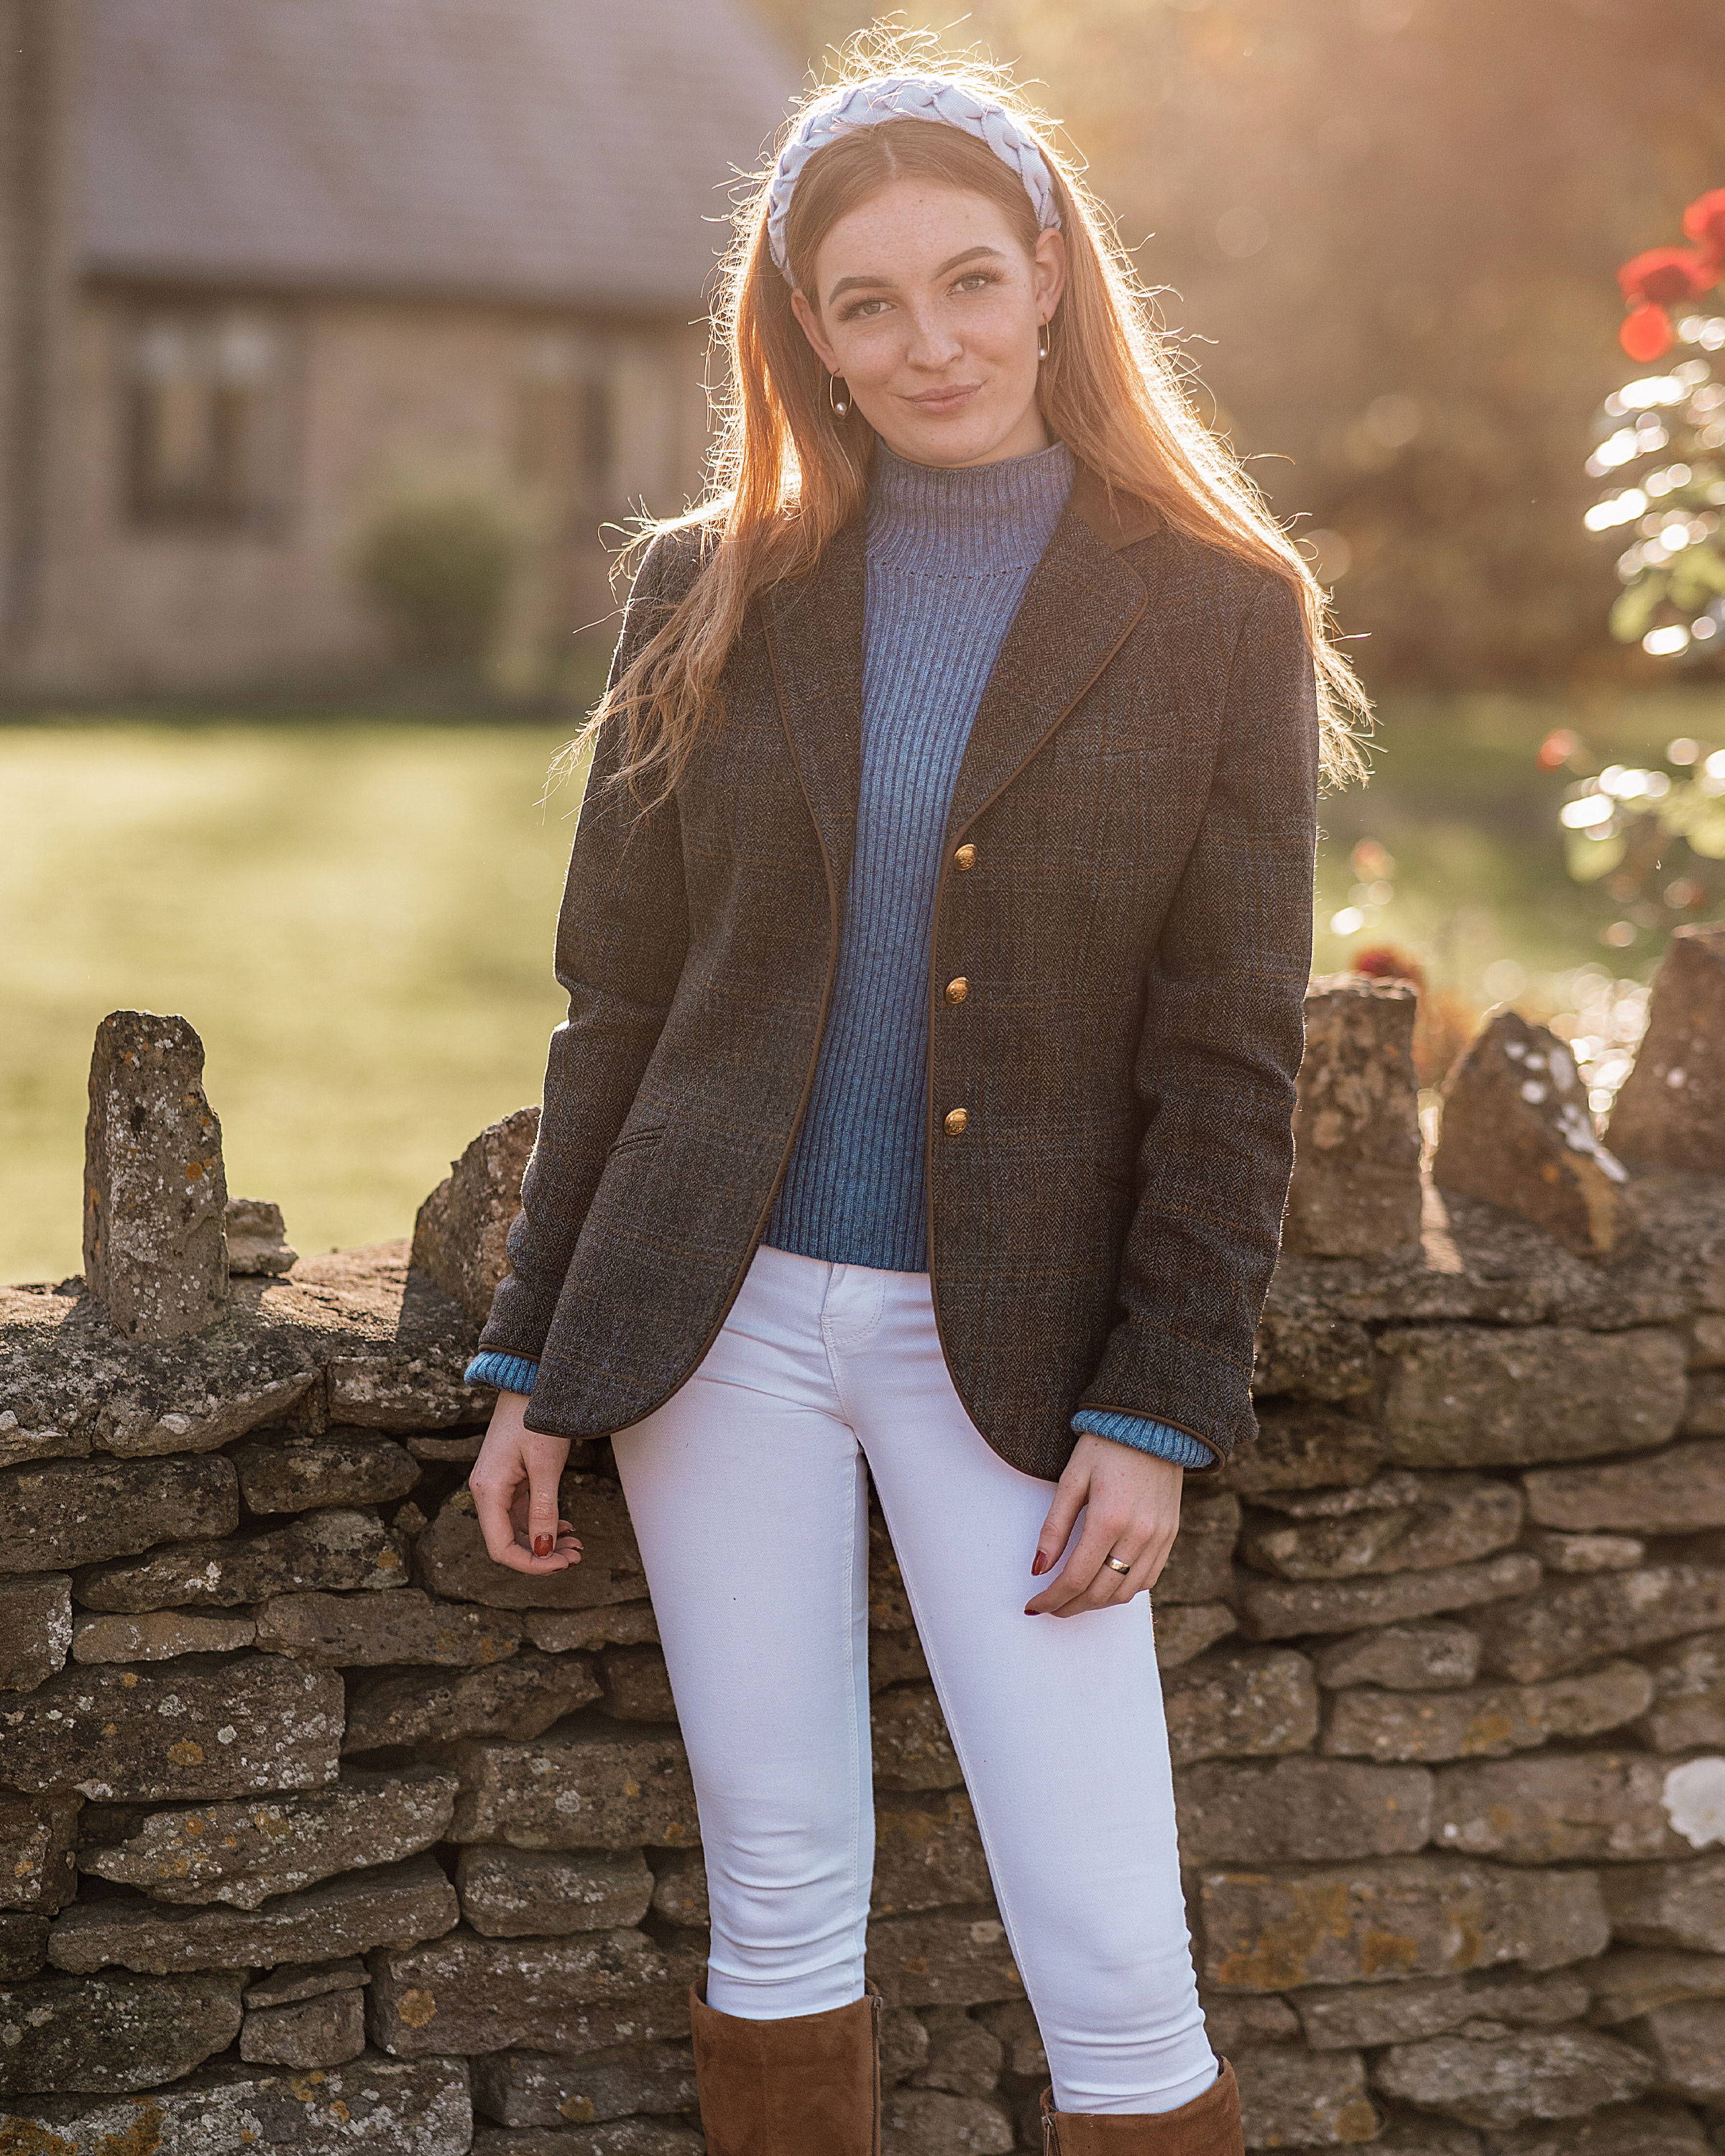 Surrey ladies blazer with jeans and jumper